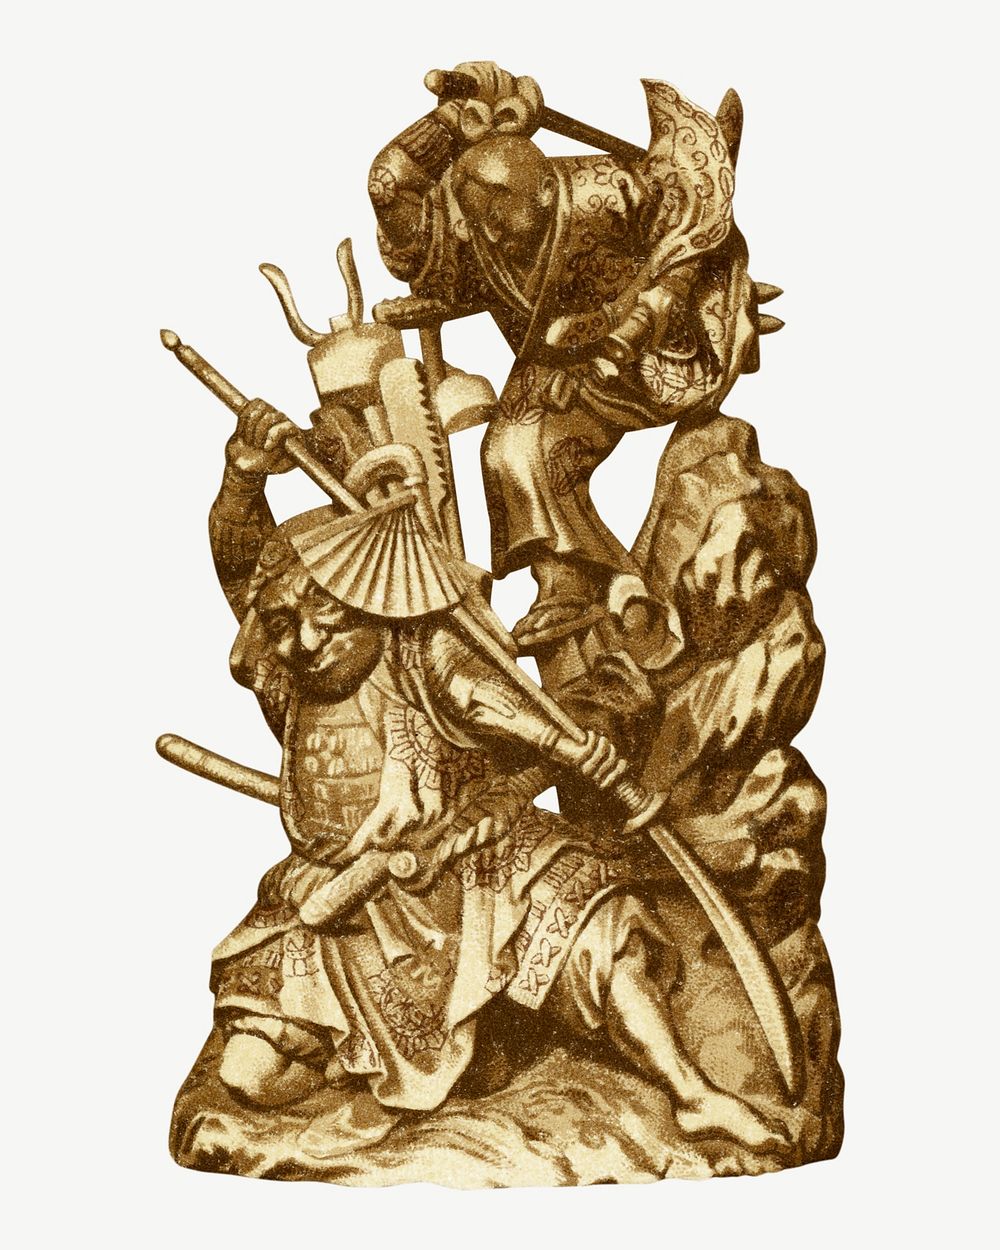 Gold Japanese warriors sculpture, by G.A. Audsley-Japanese psd. Remixed by rawpixel.